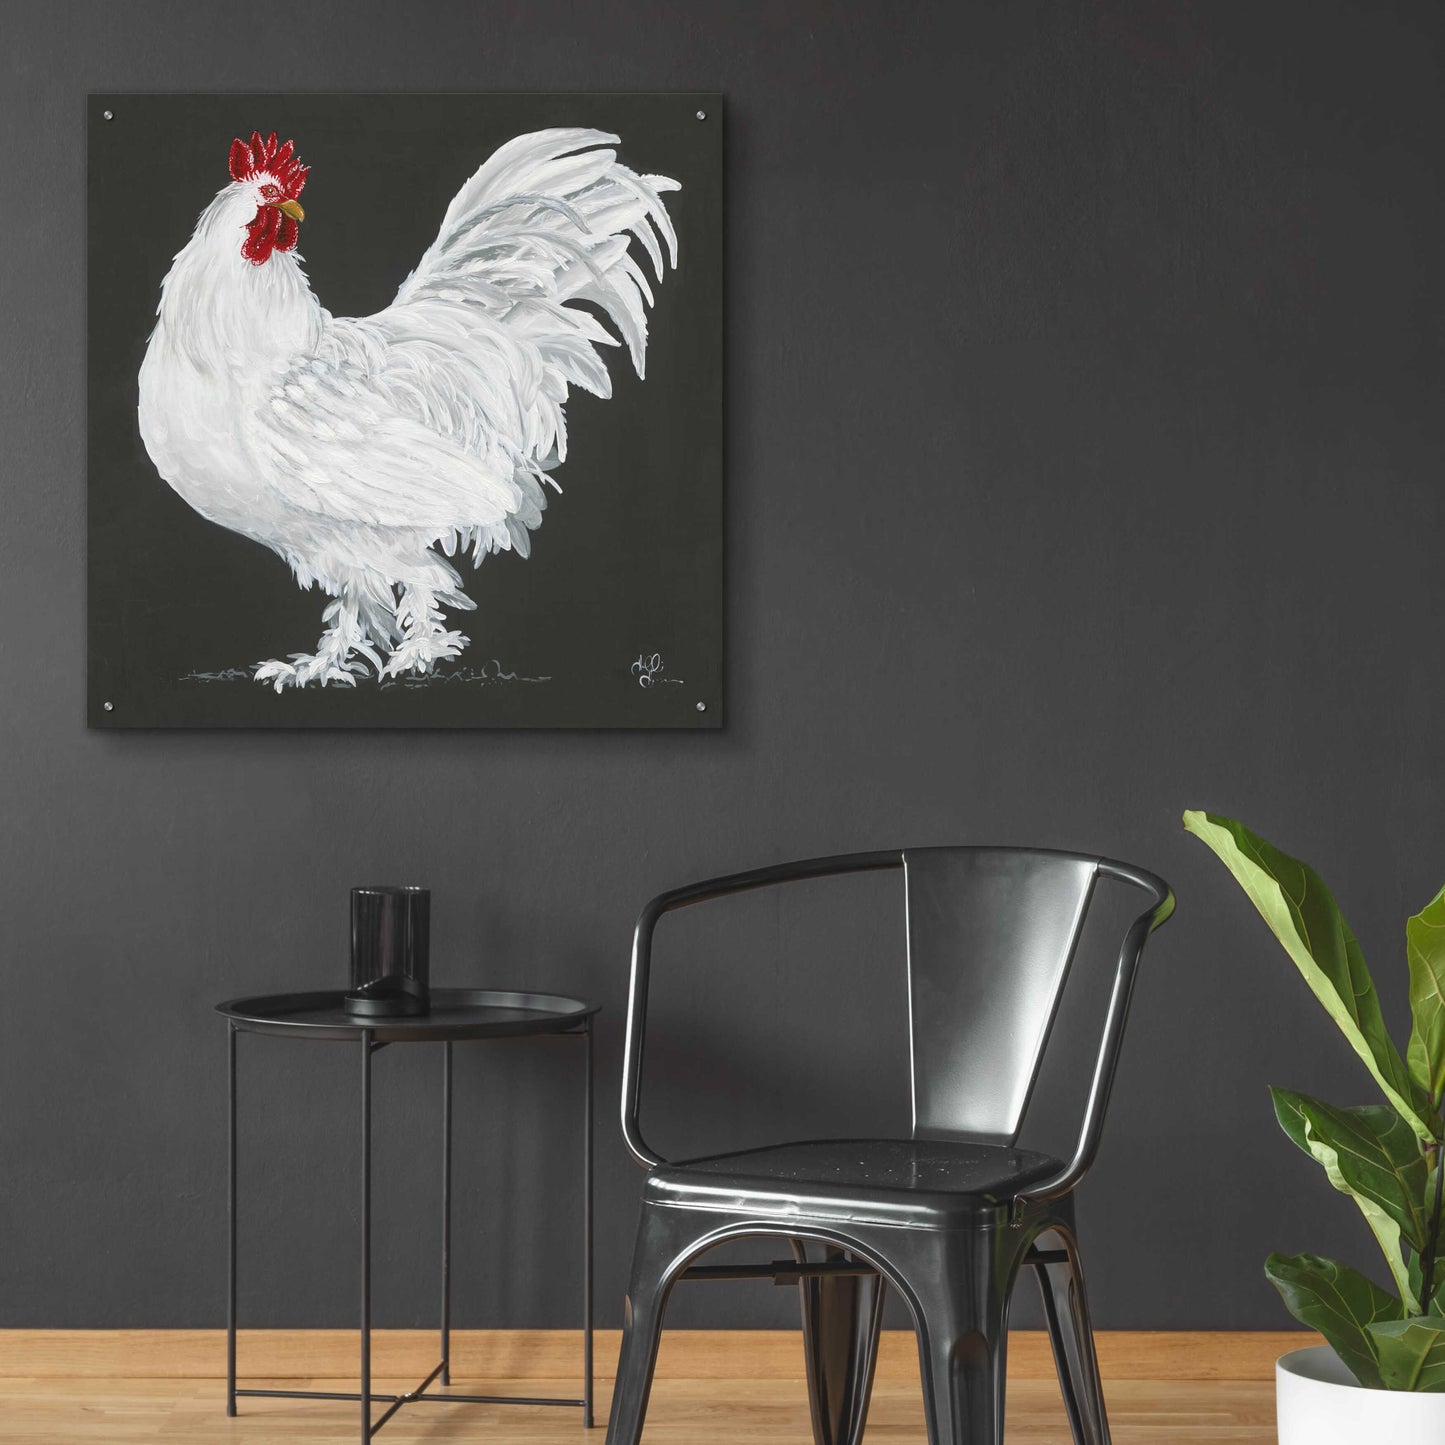 Epic Art 'Rooster' by Hollihocks Art, Acrylic Glass Wall Art,36x36